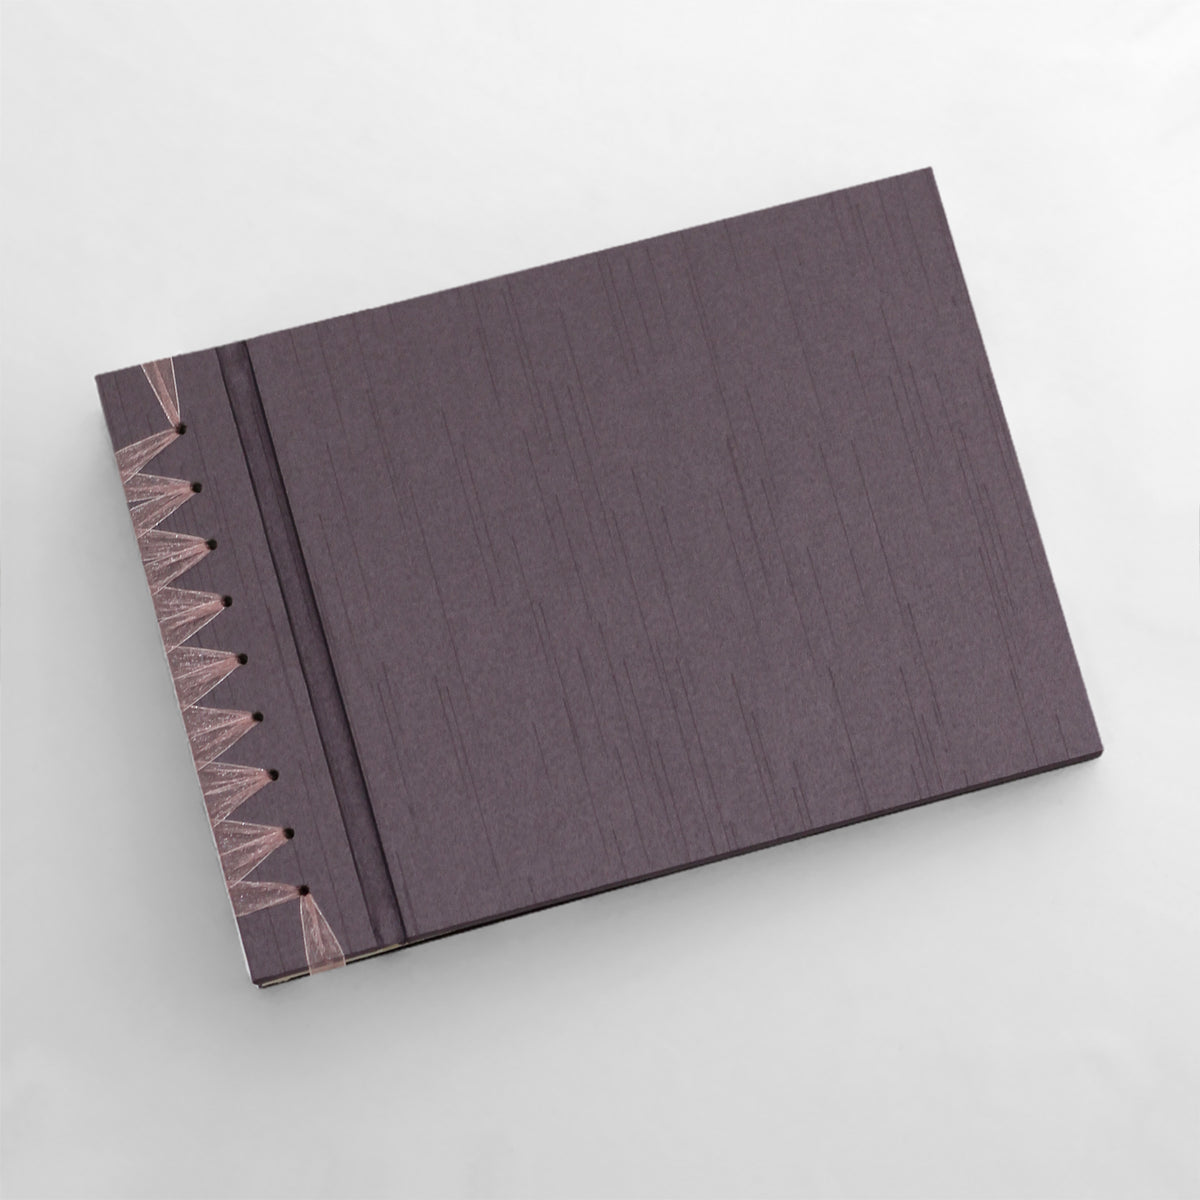 Large 10 x 15 Paper Page Album | Cover: Amethyst Silk | Available Personalized